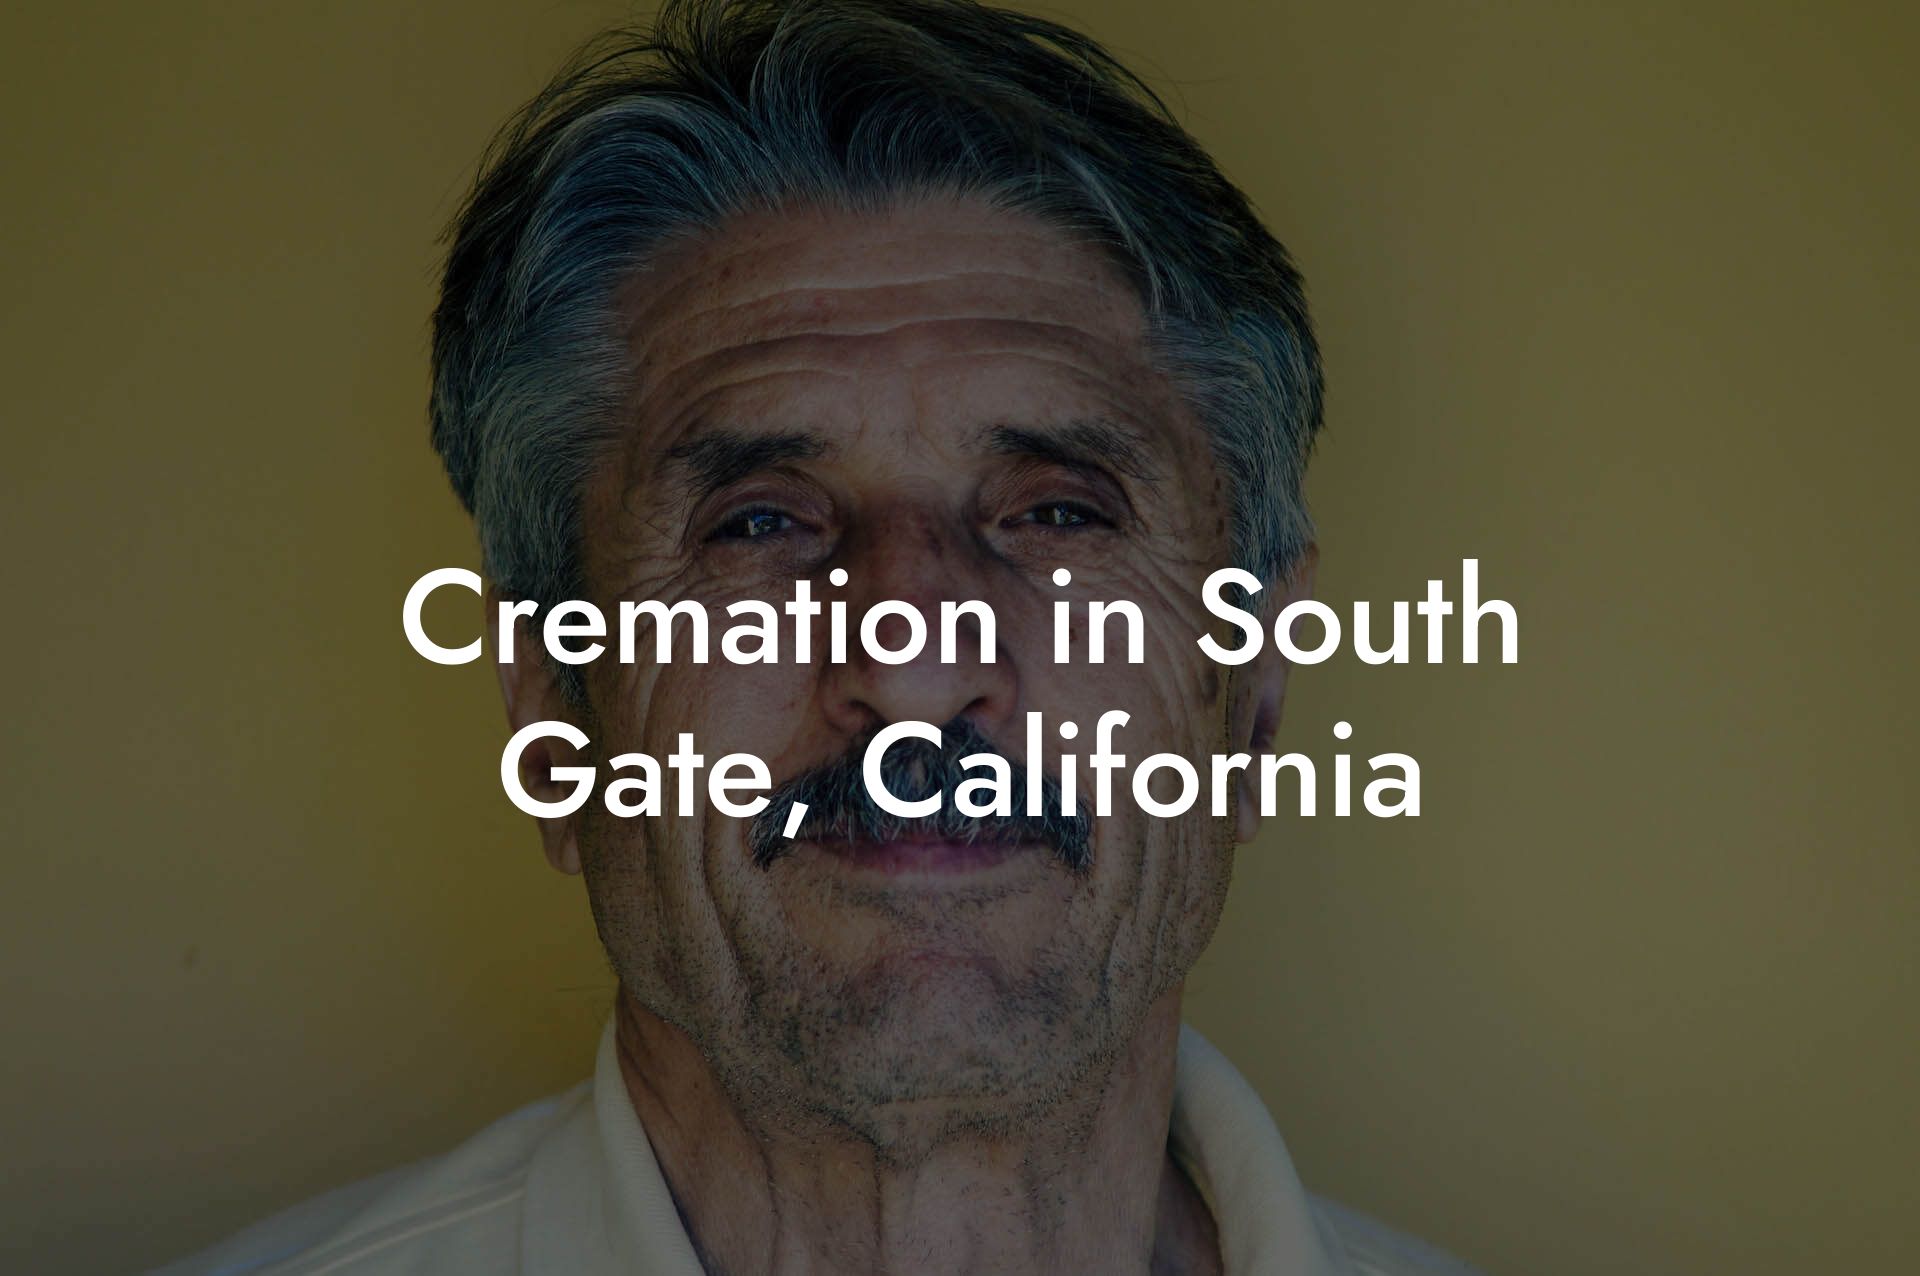 Cremation in South Gate, California